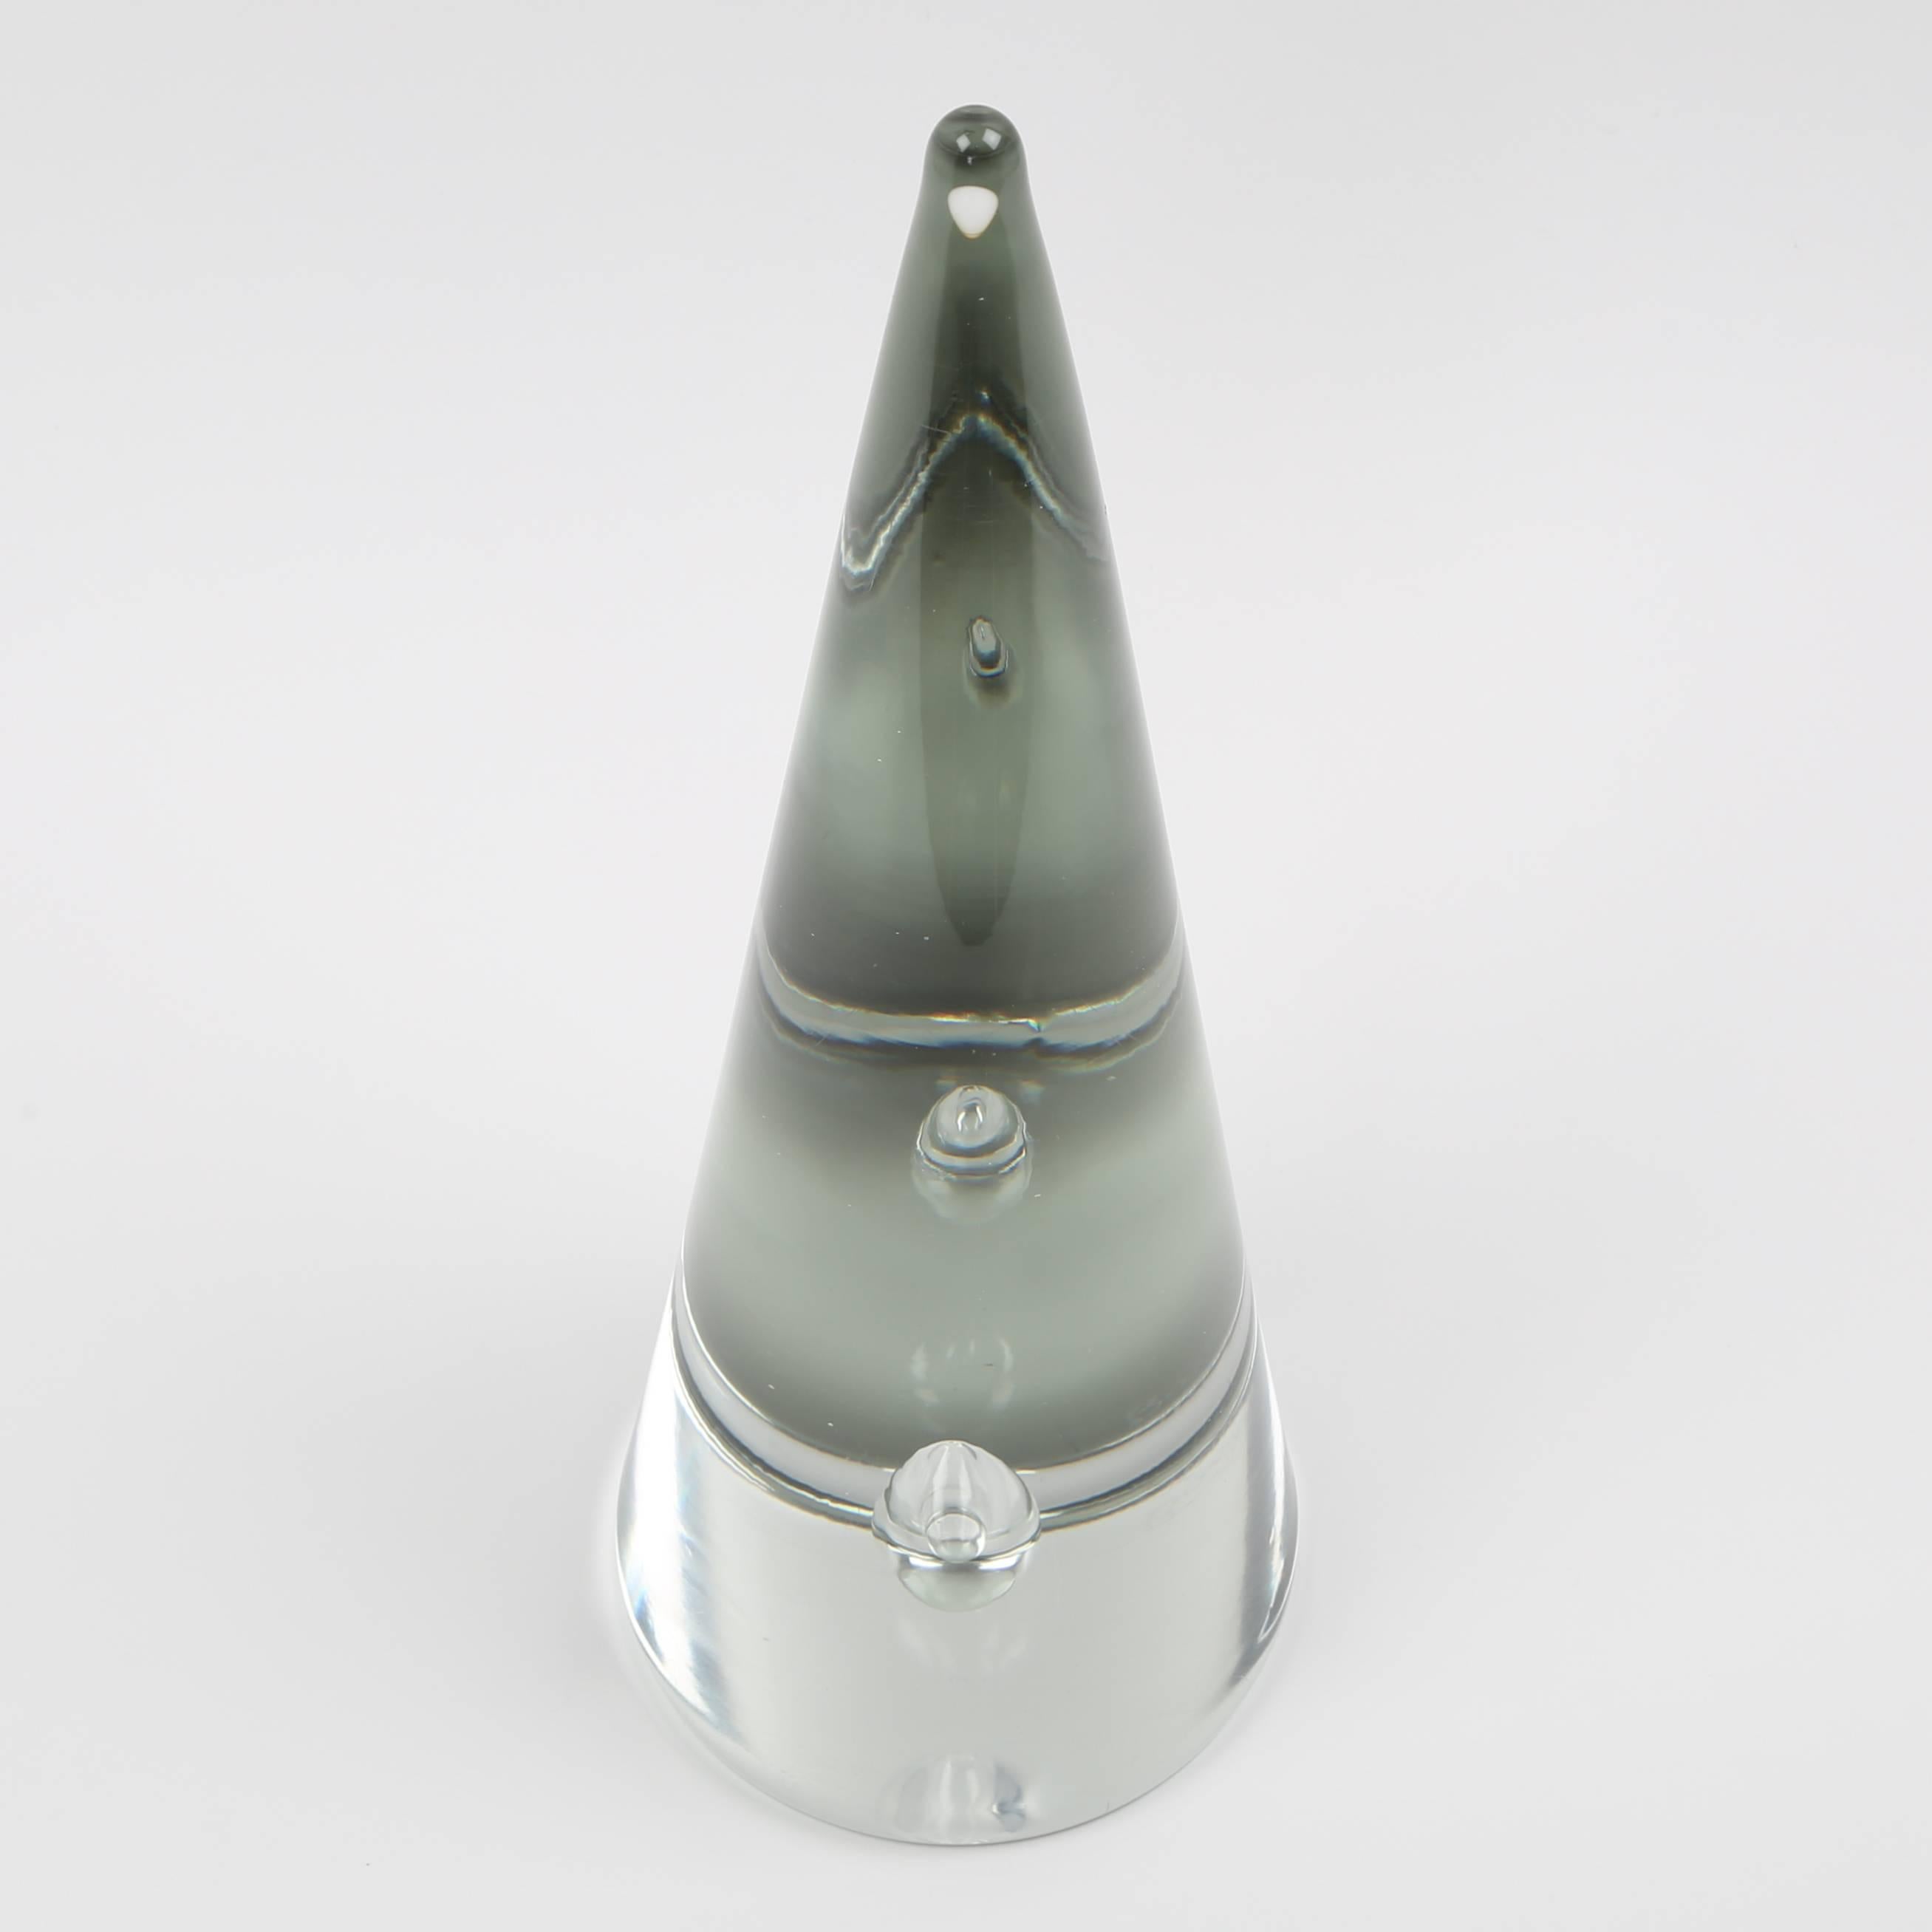 Substantial and heavy decorative glass cone by Alfredo Barbini featuring a single air bubble at the base. Signed 